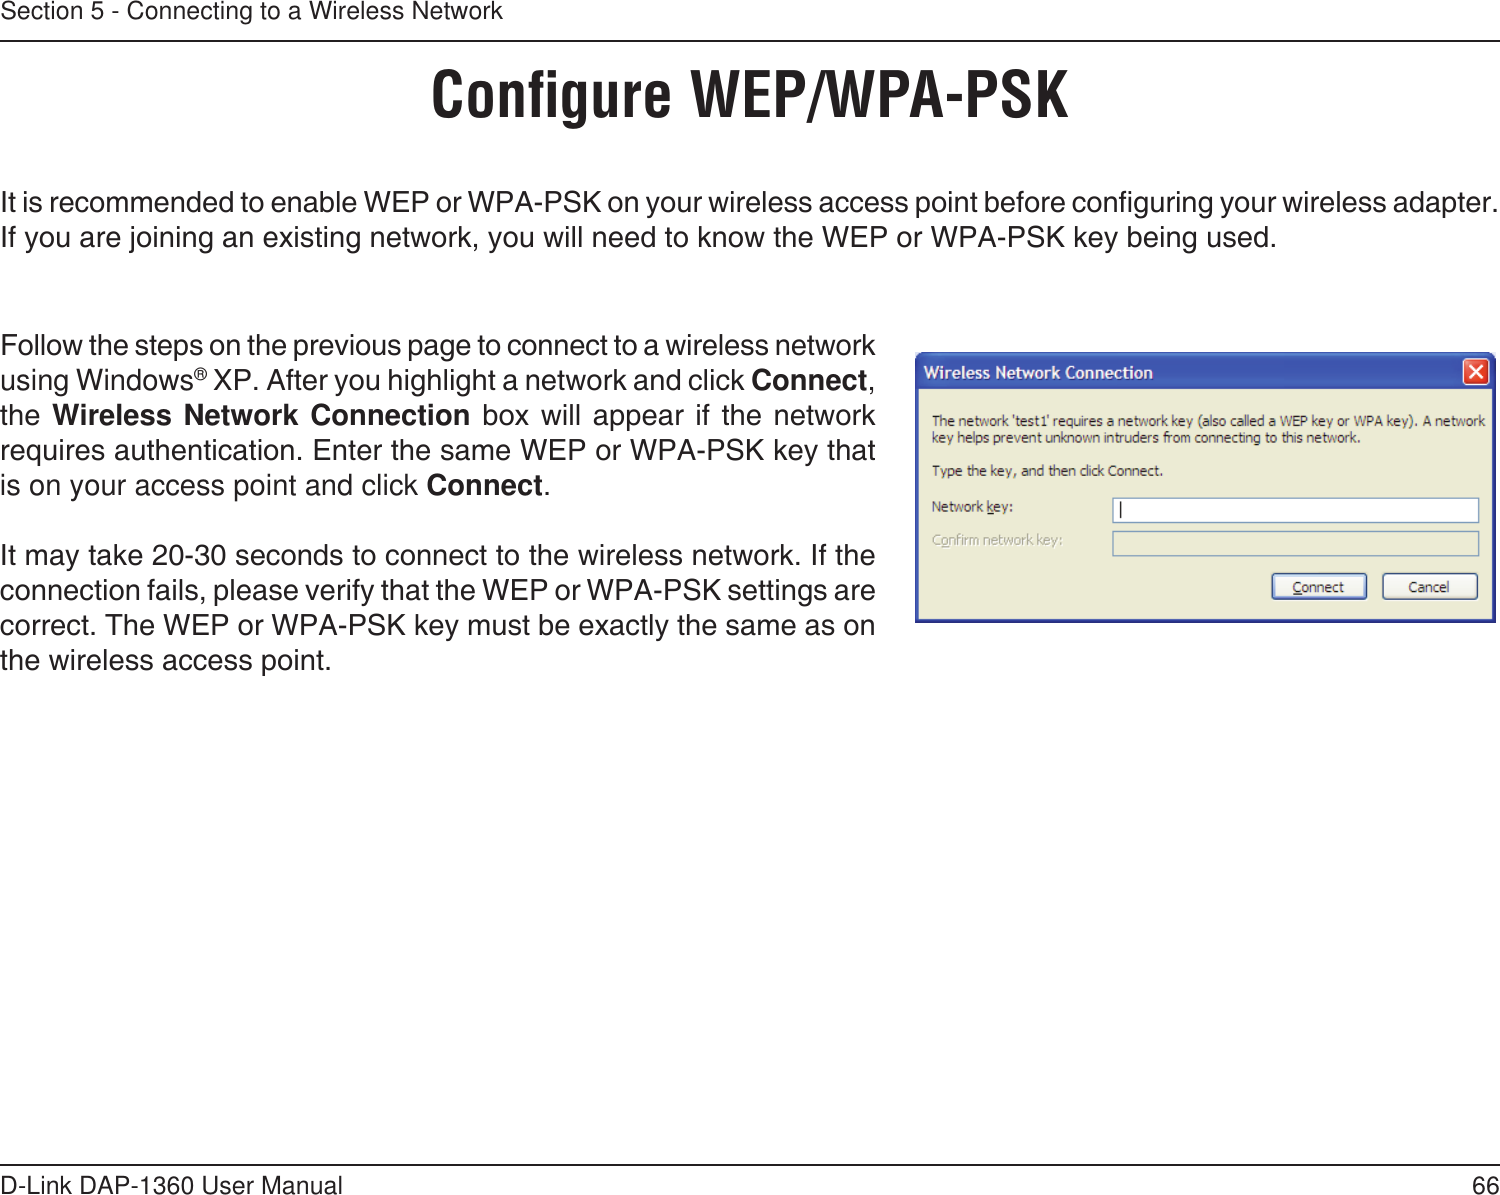 66D-Link DAP-1360 User ManualSection 5 - Connecting to a Wireless NetworkConﬁgure WEP/WPA-PSKIt is recommended to enable WEP or WPA-PSK on your wireless access point before conguring your wireless adapter. If you are joining an existing network, you will need to know the WEP or WPA-PSK key being used.Follow the steps on the previous page to connect to a wireless network using Windows® XP. After you highlight a network and click Connect, the Wireless Network Connection  box  will  appear if  the  network requires authentication. Enter the same WEP or WPA-PSK key that is on your access point and click Connect.It may take 20-30 seconds to connect to the wireless network. If the connection fails, please verify that the WEP or WPA-PSK settings are correct. The WEP or WPA-PSK key must be exactly the same as on the wireless access point.